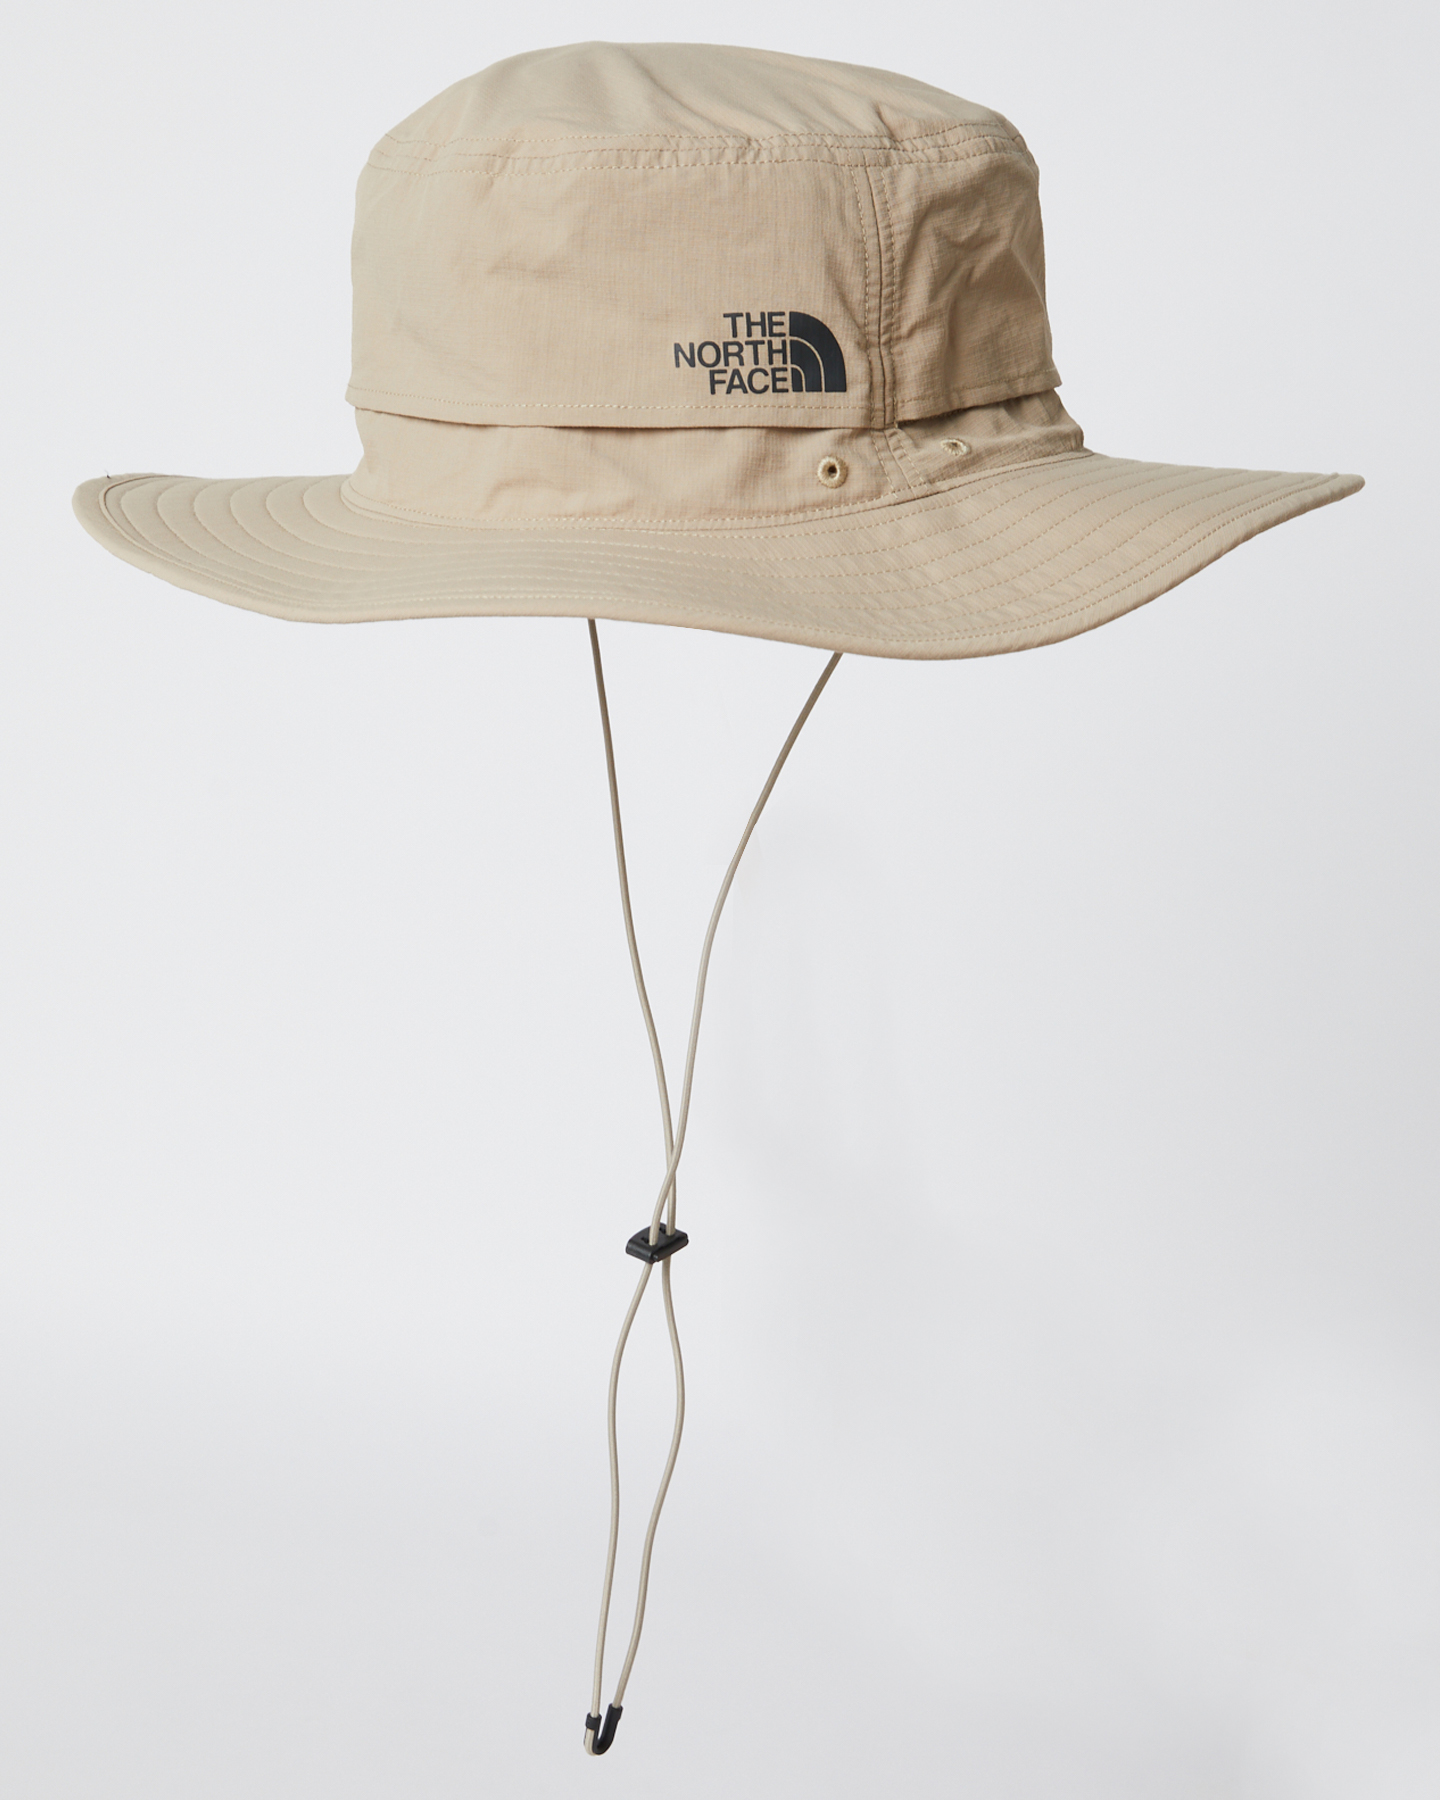 https://content.surfstitch.com/image/upload/v1668761862/NF0A5FX6254/DUNE-BEIGE-MENS-ACCESSORIES-THE-NORTH-FACE-HEADWEAR-NF0A5FX6254_1.JPG